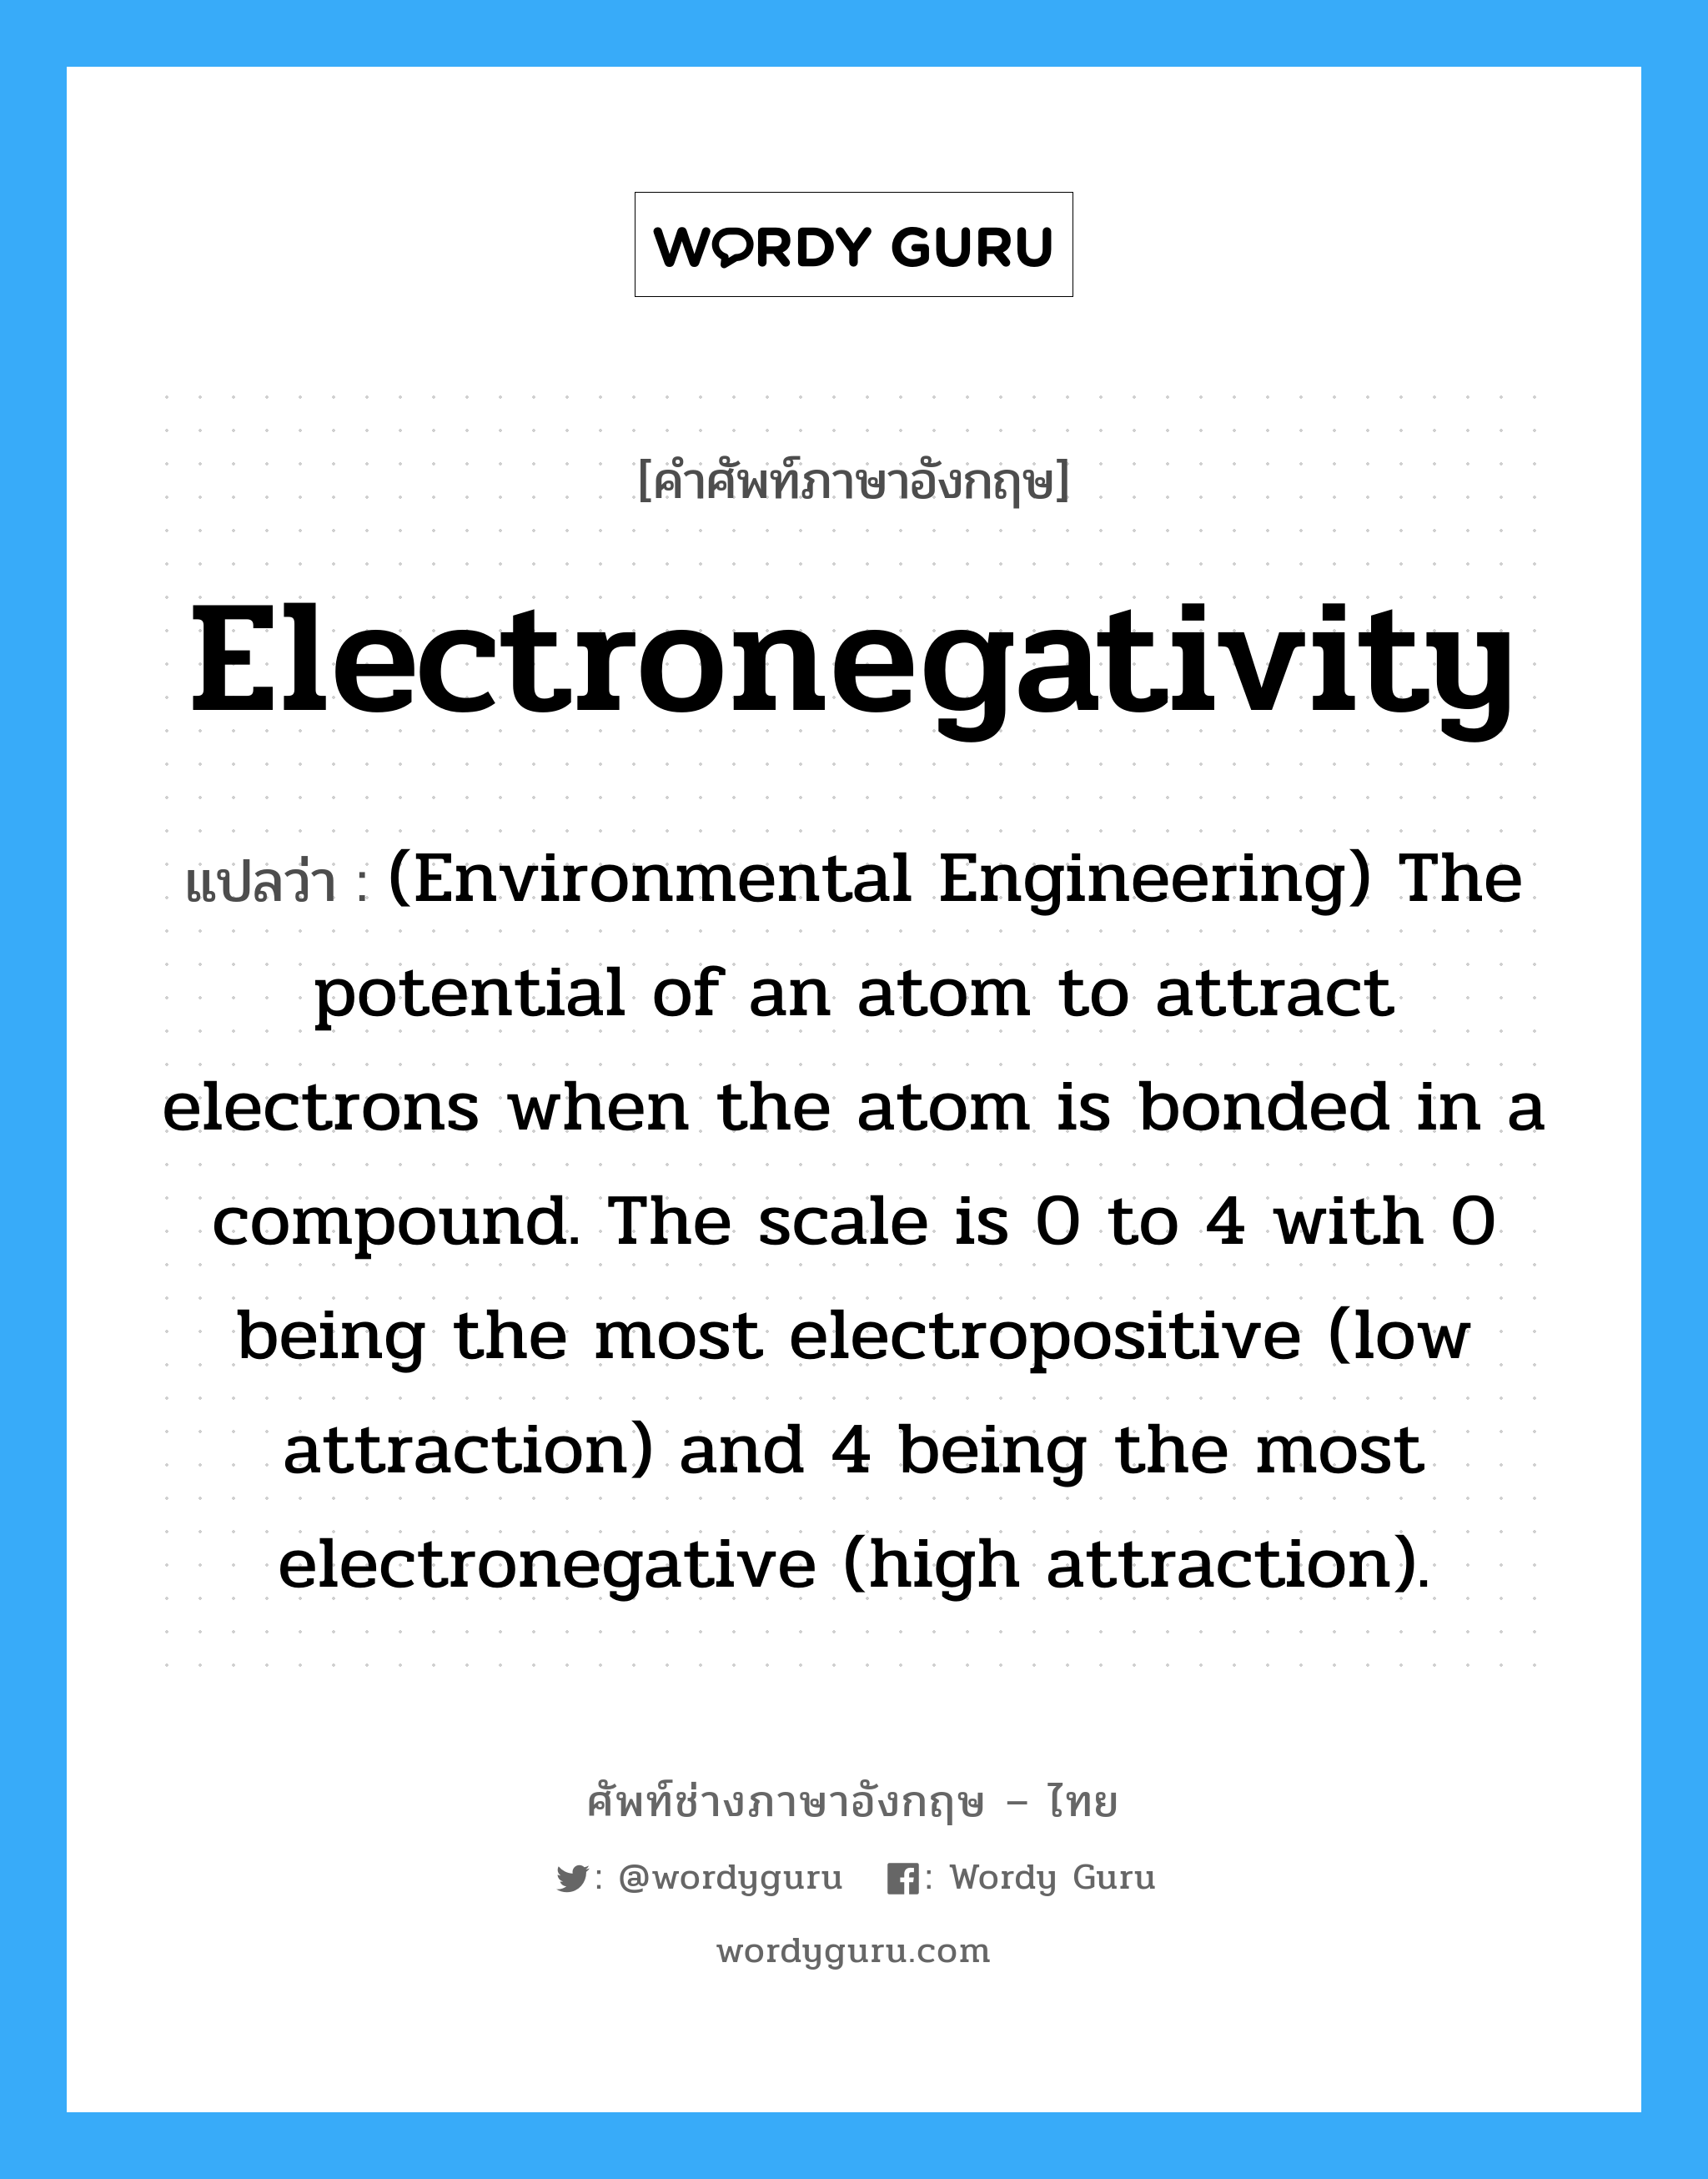 (Environmental Engineering) The potential of an atom to attract electrons when the atom is bonded in a compound. The scale is 0 to 4 with 0 being the most electropositive (low attraction) and 4 being the most electronegative (high attraction). ภาษาอังกฤษ?, คำศัพท์ช่างภาษาอังกฤษ - ไทย (Environmental Engineering) The potential of an atom to attract electrons when the atom is bonded in a compound. The scale is 0 to 4 with 0 being the most electropositive (low attraction) and 4 being the most electronegative (high attraction). คำศัพท์ภาษาอังกฤษ (Environmental Engineering) The potential of an atom to attract electrons when the atom is bonded in a compound. The scale is 0 to 4 with 0 being the most electropositive (low attraction) and 4 being the most electronegative (high attraction). แปลว่า Electronegativity